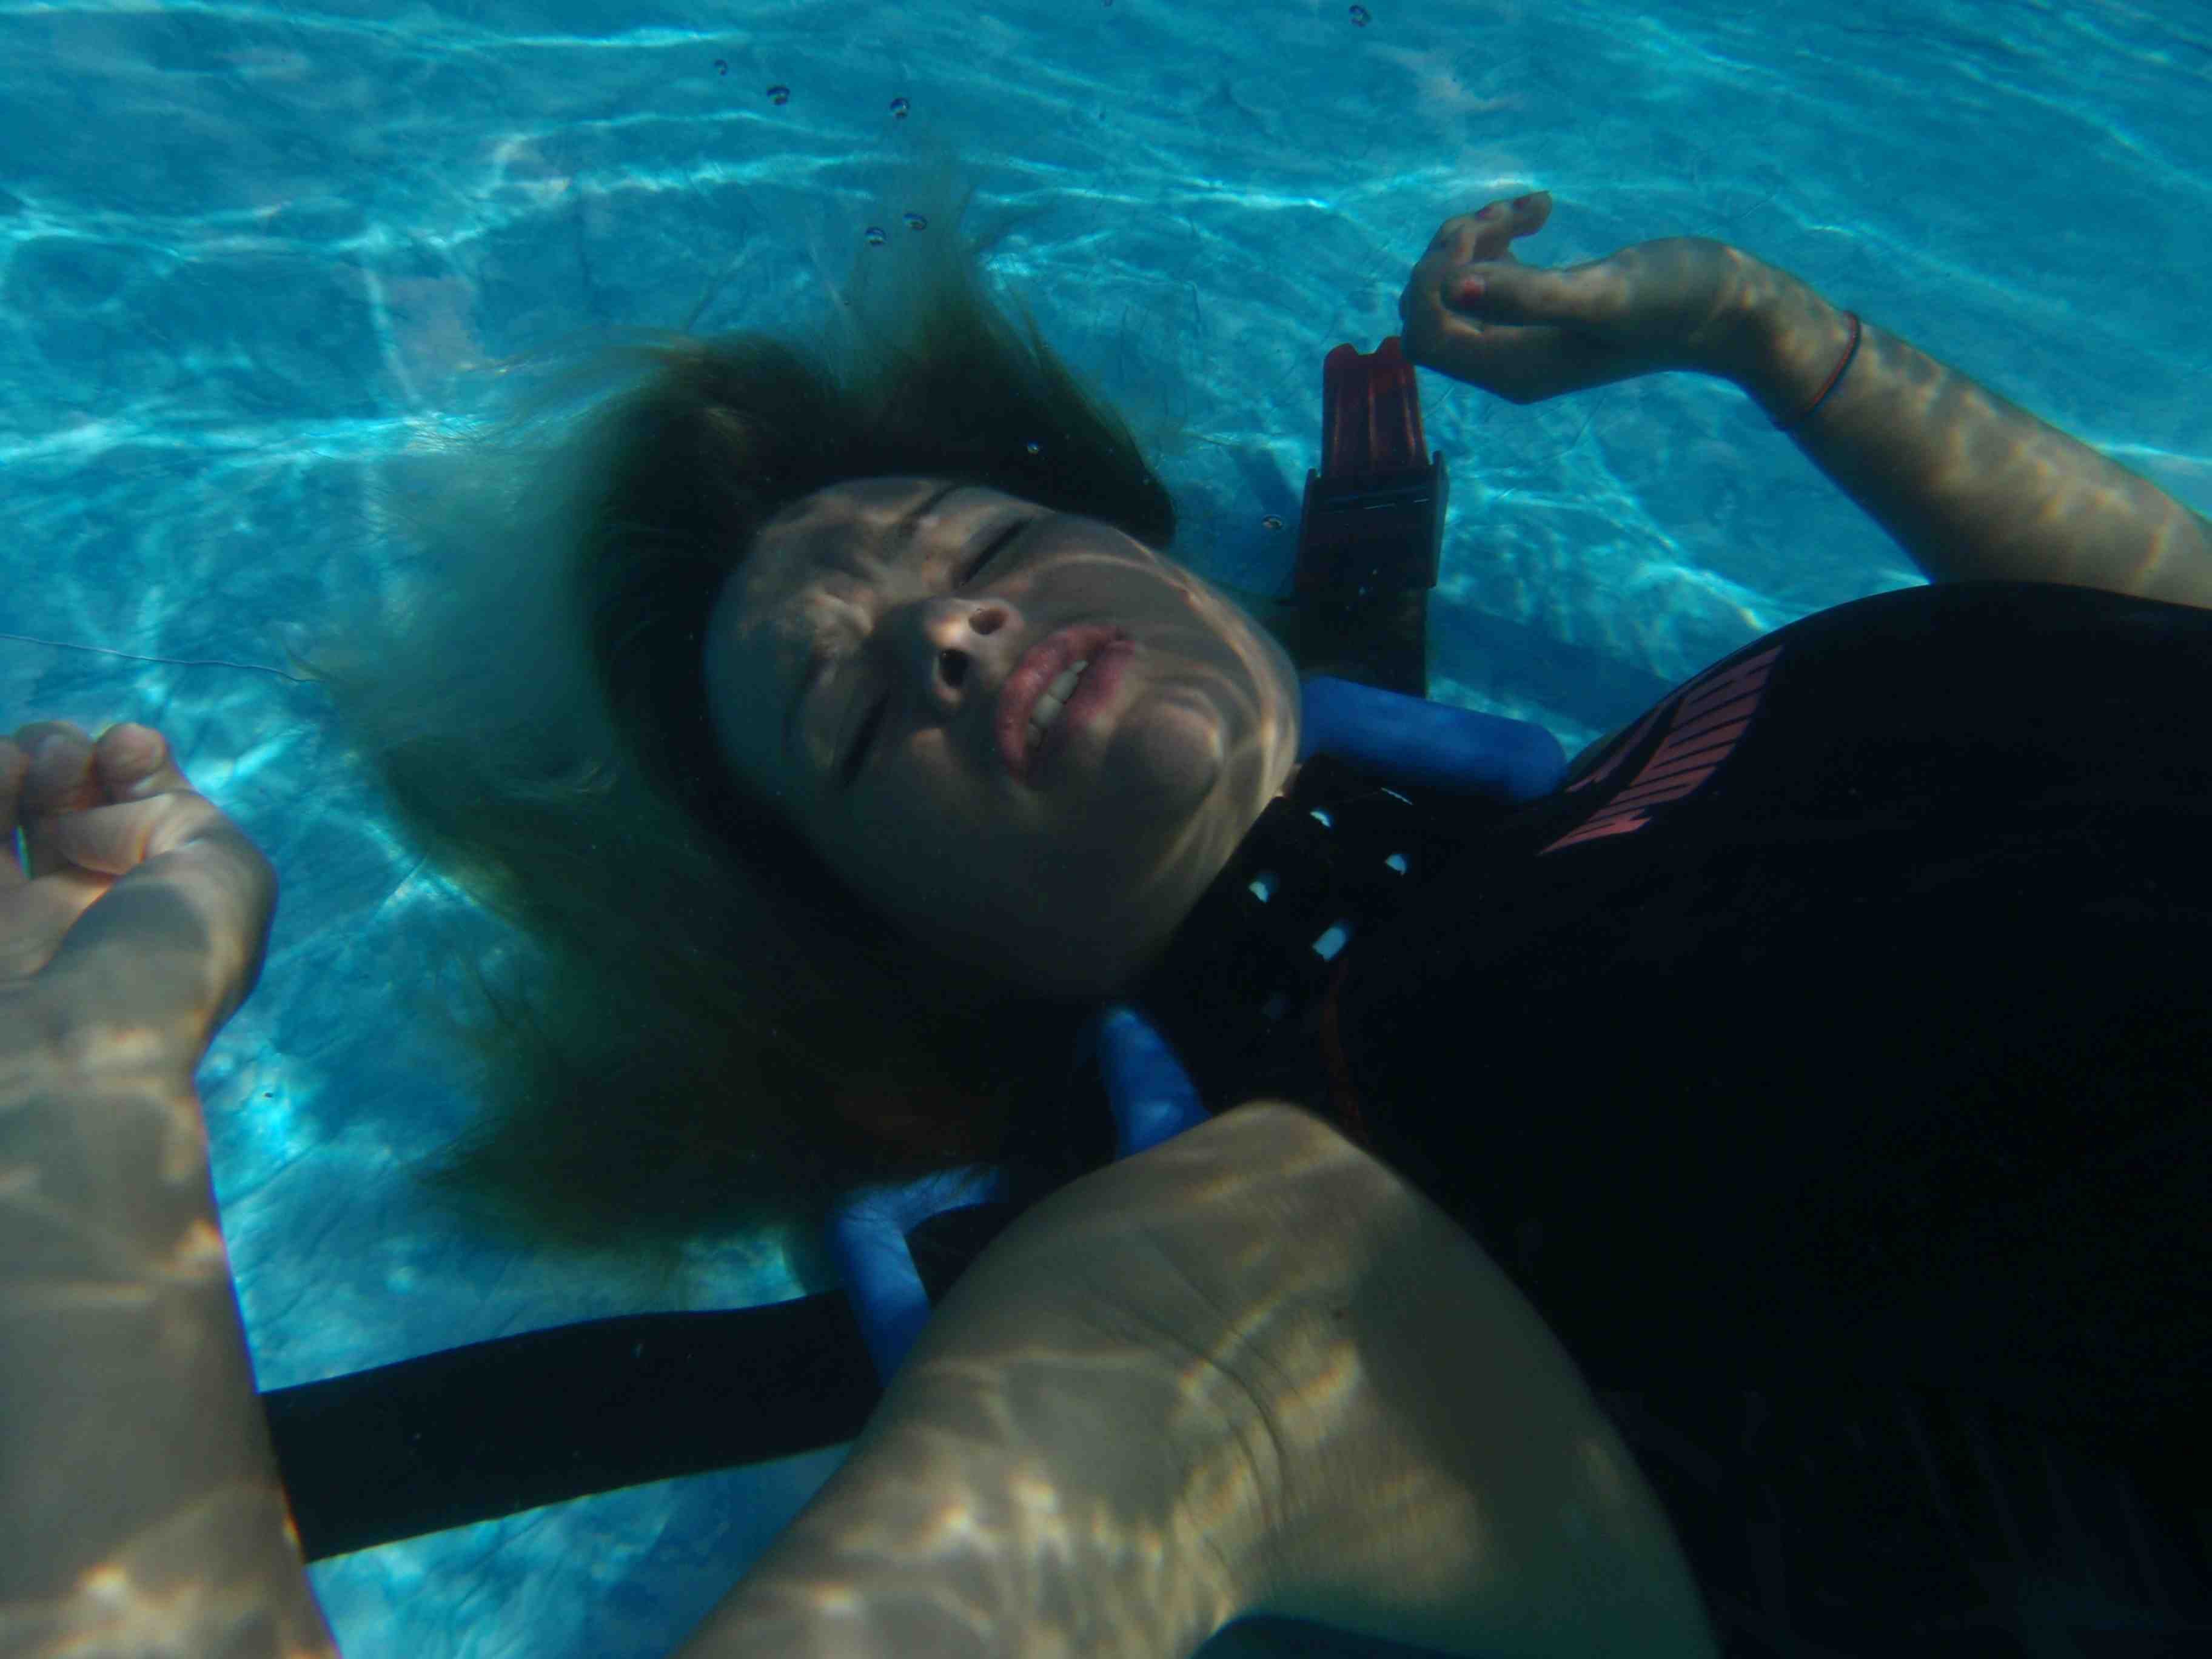 Underwater Drowning Woman - 33 photos